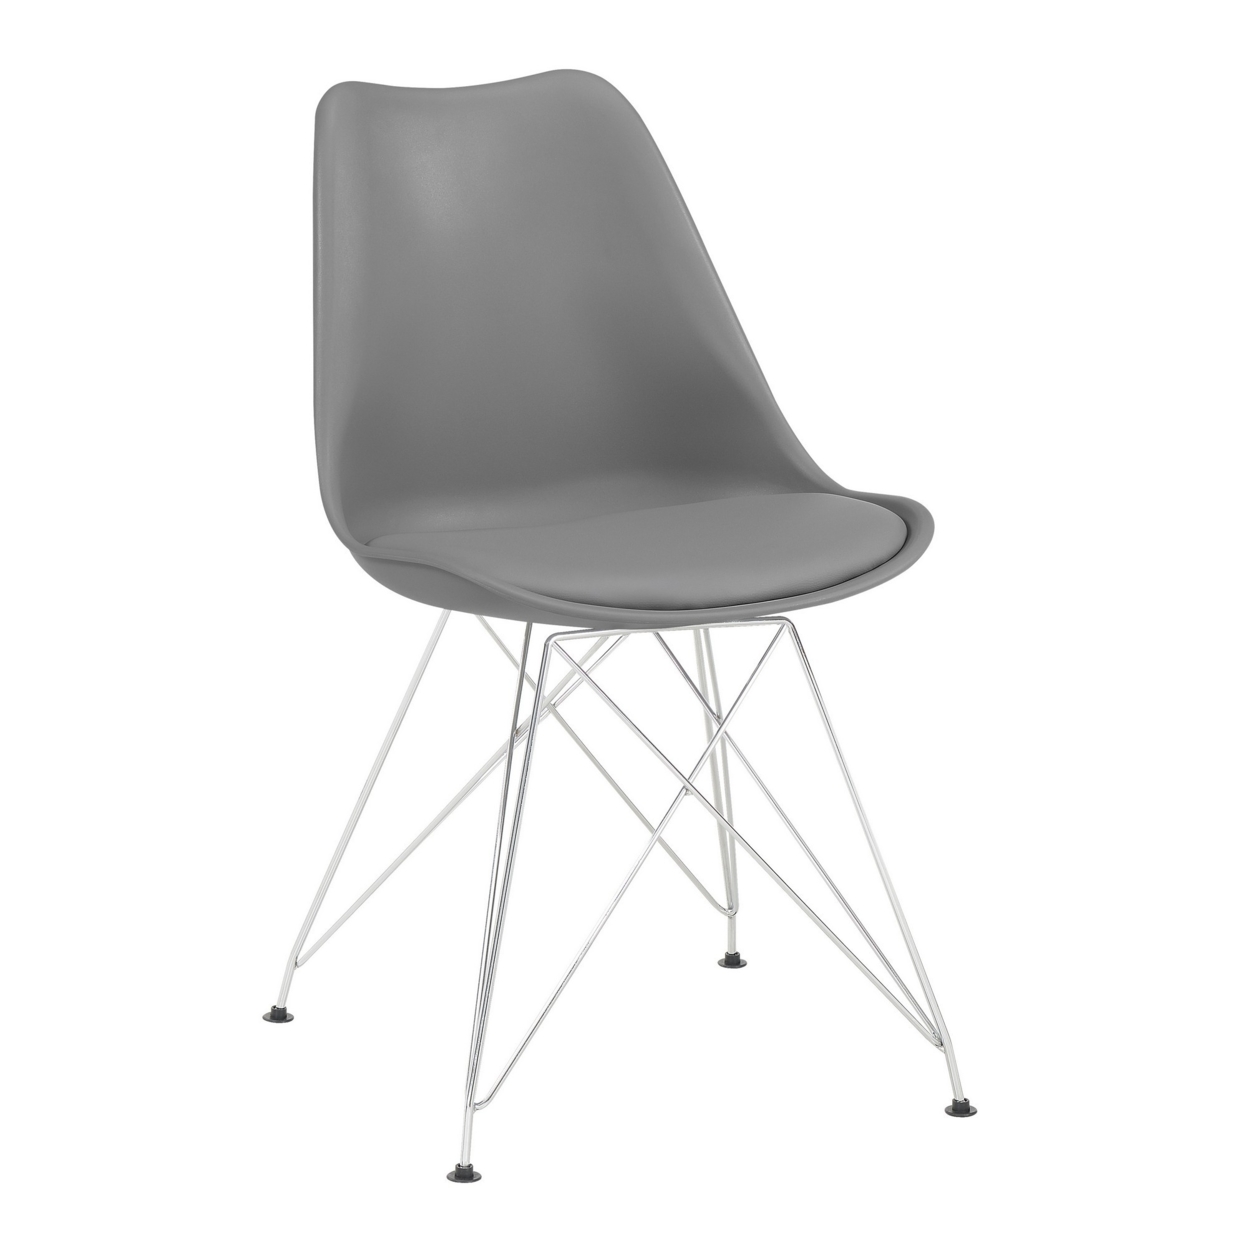 Fabric Dining Chair With Interconnected Metal Legs, Set Of 2,Gray And Chrome- Saltoro Sherpi